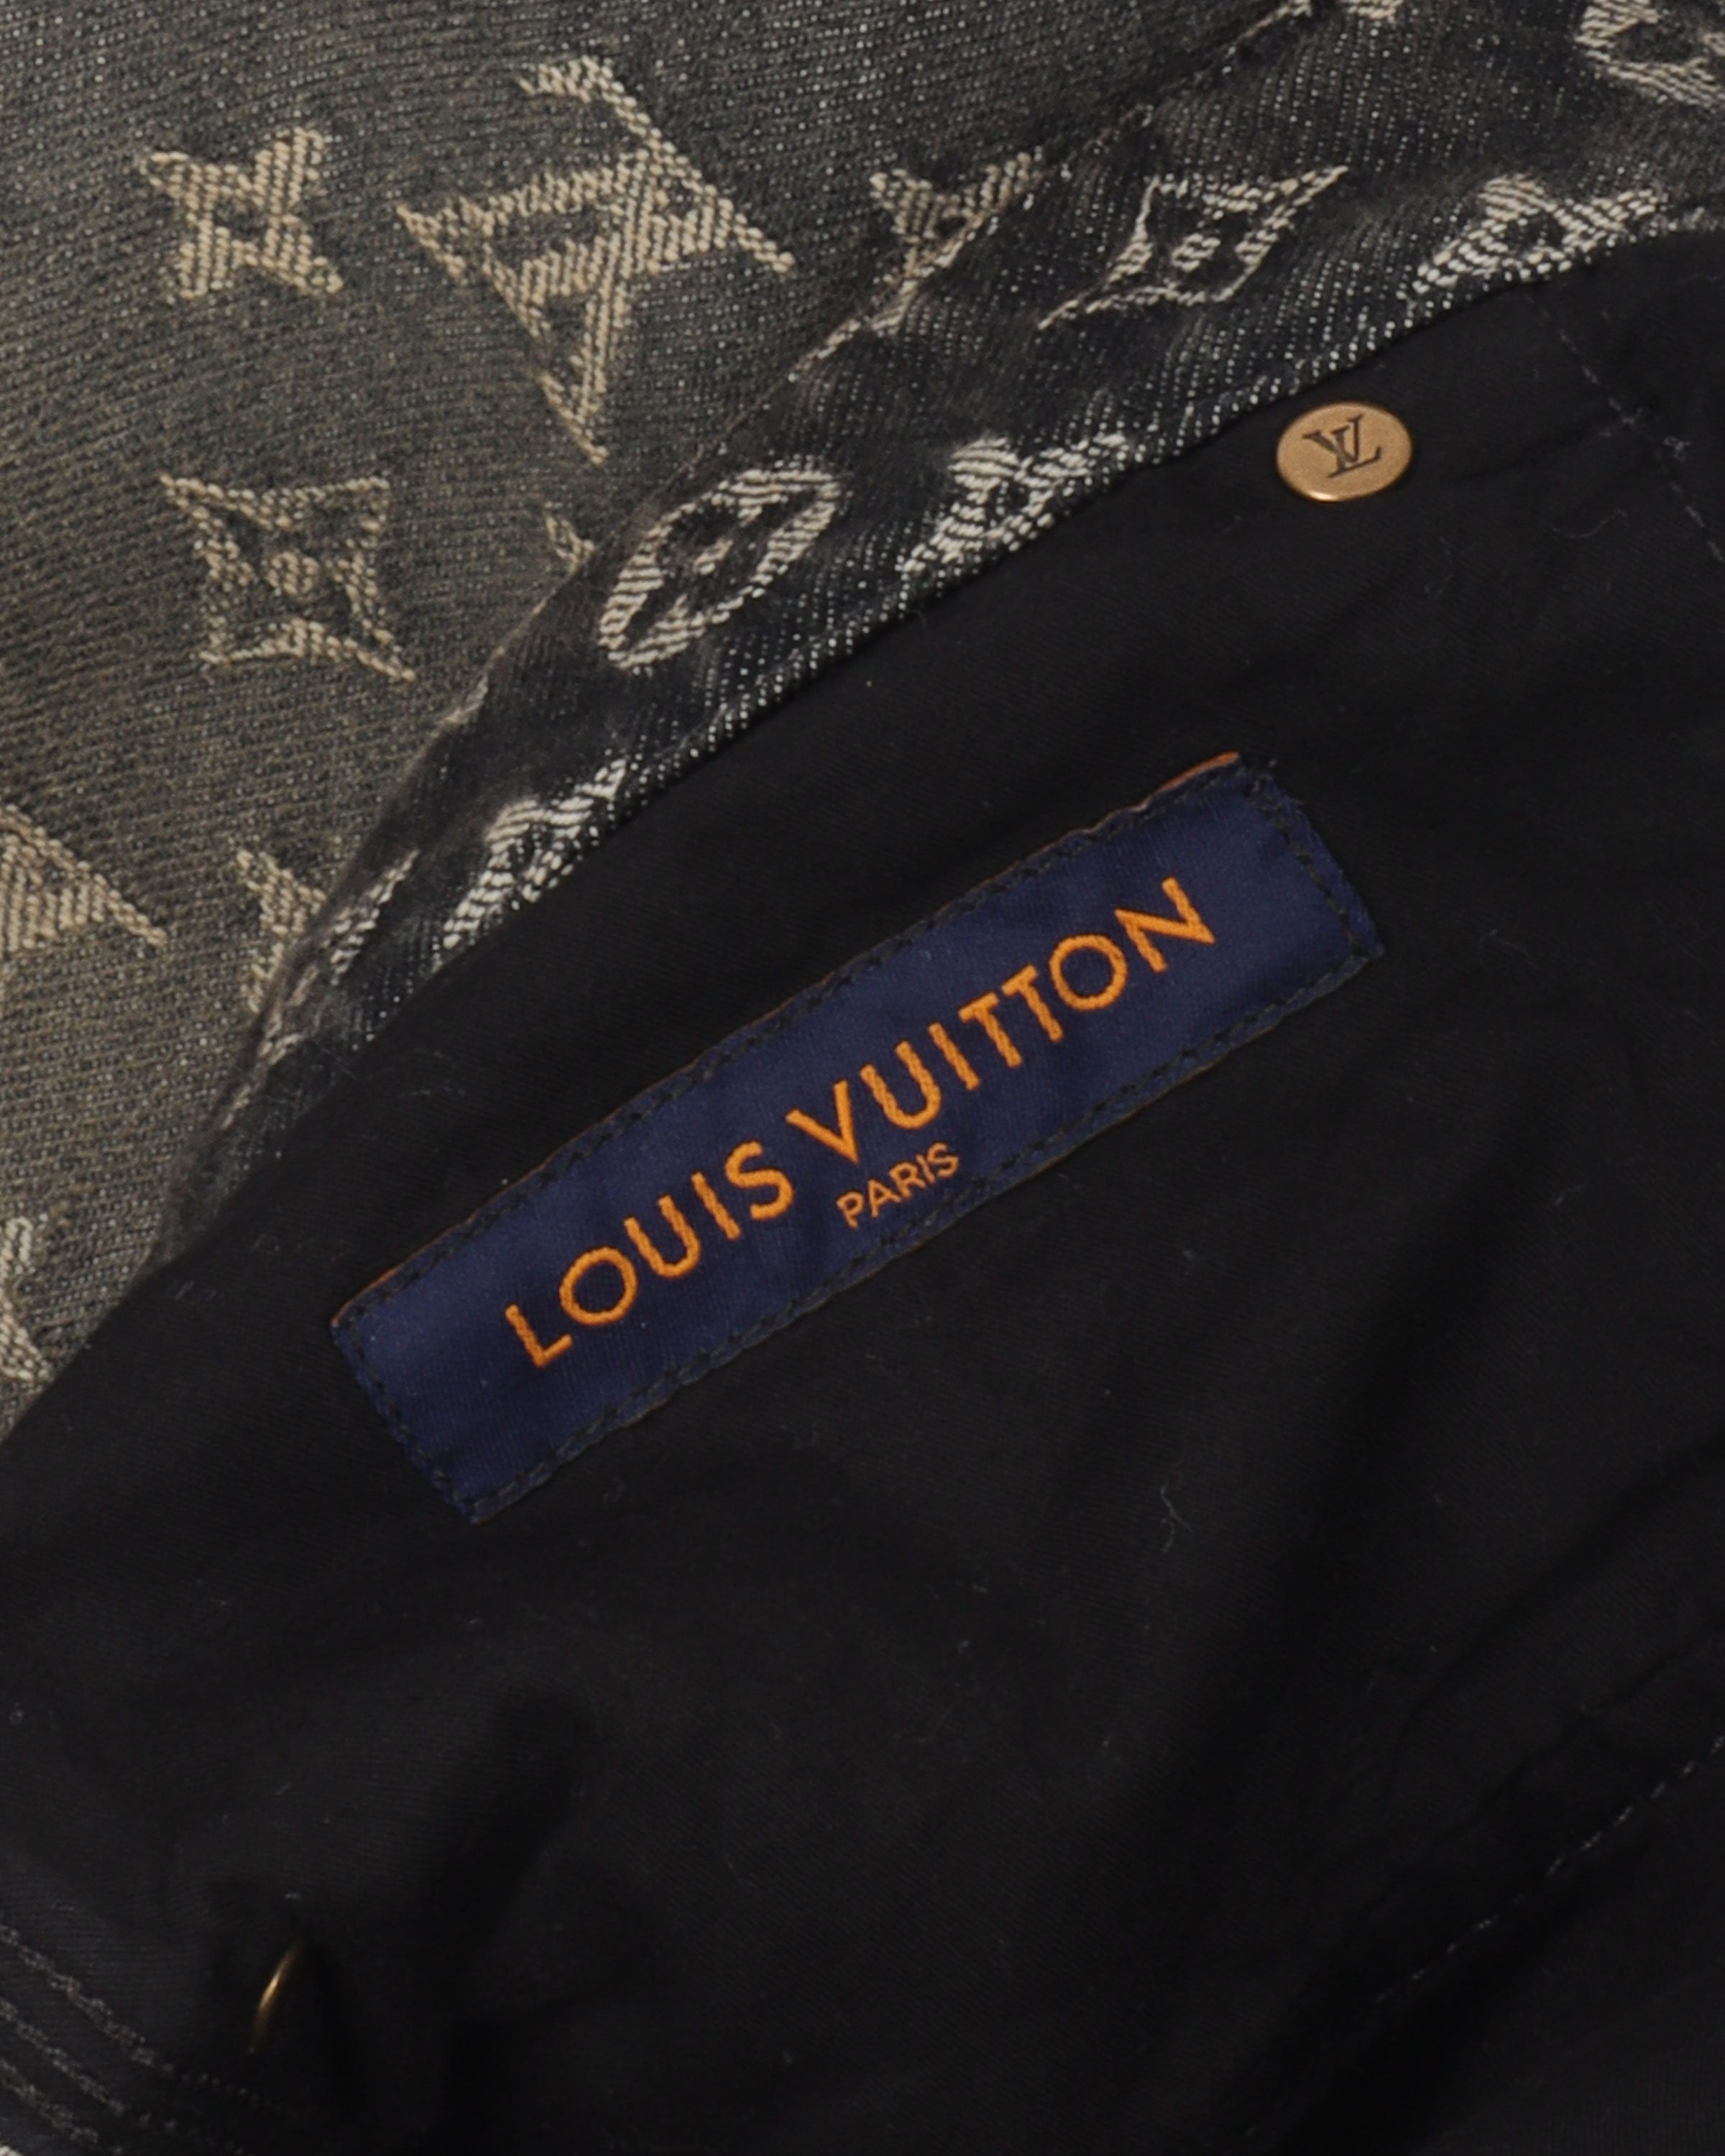 Louis Vuitton, Jeans, Black Louis Vuitton Jeans With Embroidered Pockets